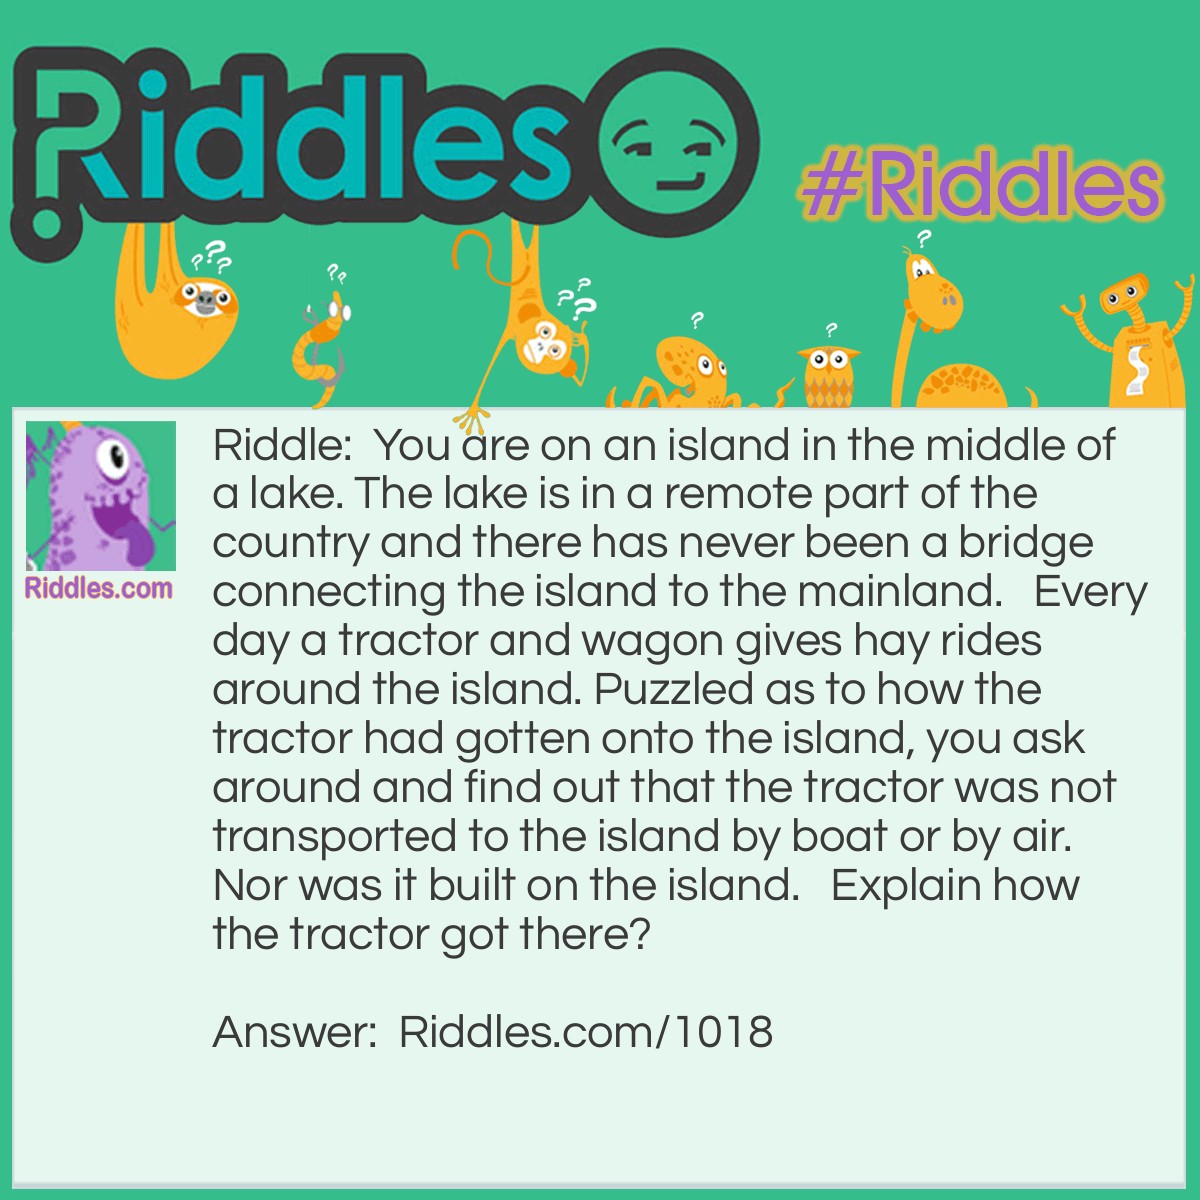 Riddle: You are on an island in the middle of a lake. The lake is in a remote part of the country and there has never been a bridge connecting the island to the mainland.   Every day a tractor and wagon gives hay rides around the island. Puzzled as to how the tractor had gotten onto the island, you ask around and find out that the tractor was not transported to the island by boat or by air. Nor was it built on the island.   Explain how the tractor got there? Answer: It was driven over in winter when the lake was frozen.